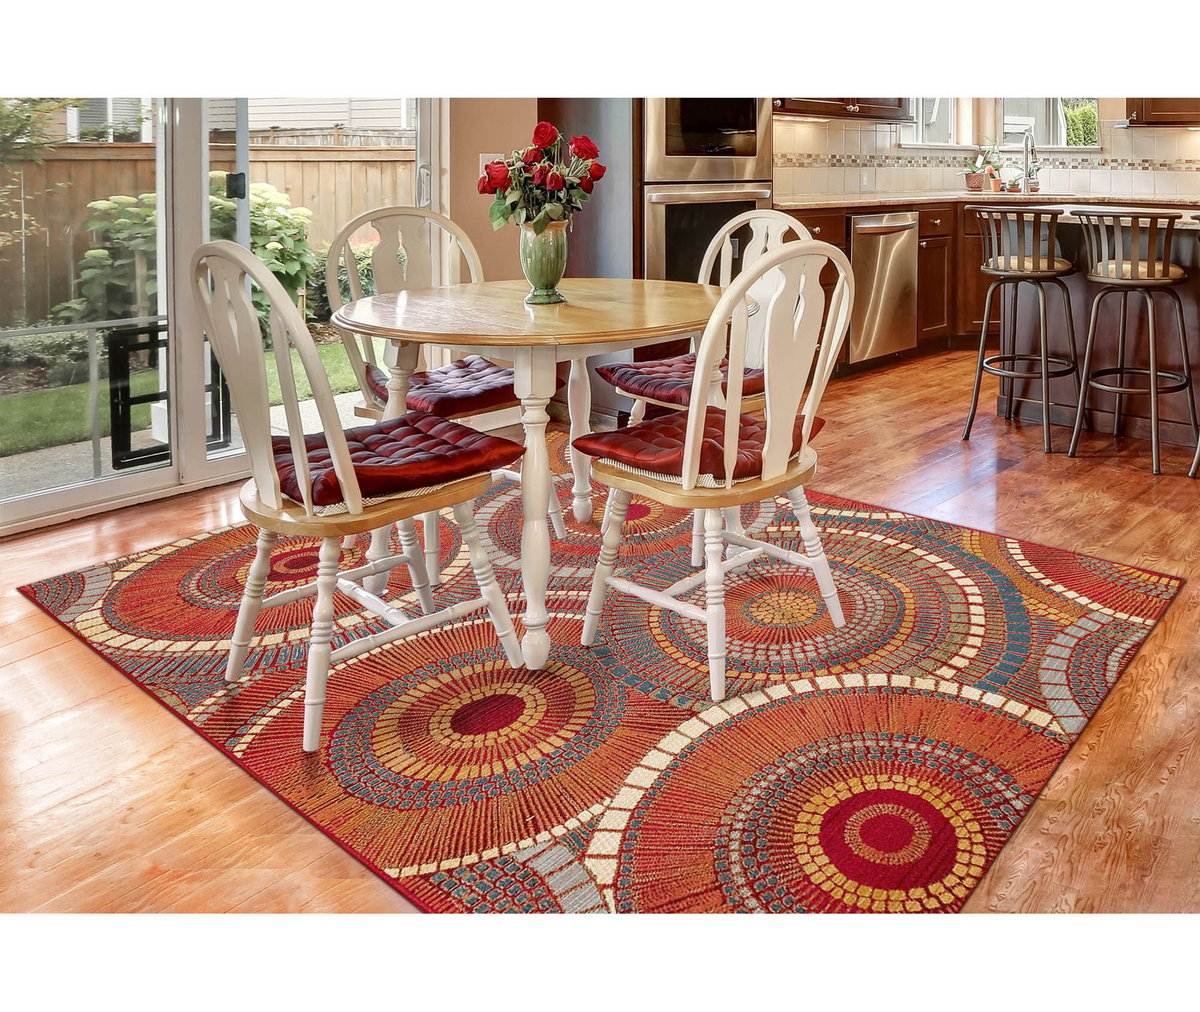 Multicolored Designs Comfortable & Durable Power Loomed Liora Manne Marina Indoor Outdoor Rug 3'3 x 4'11 UV Stabilized Circles Saffron Polypropylene Material